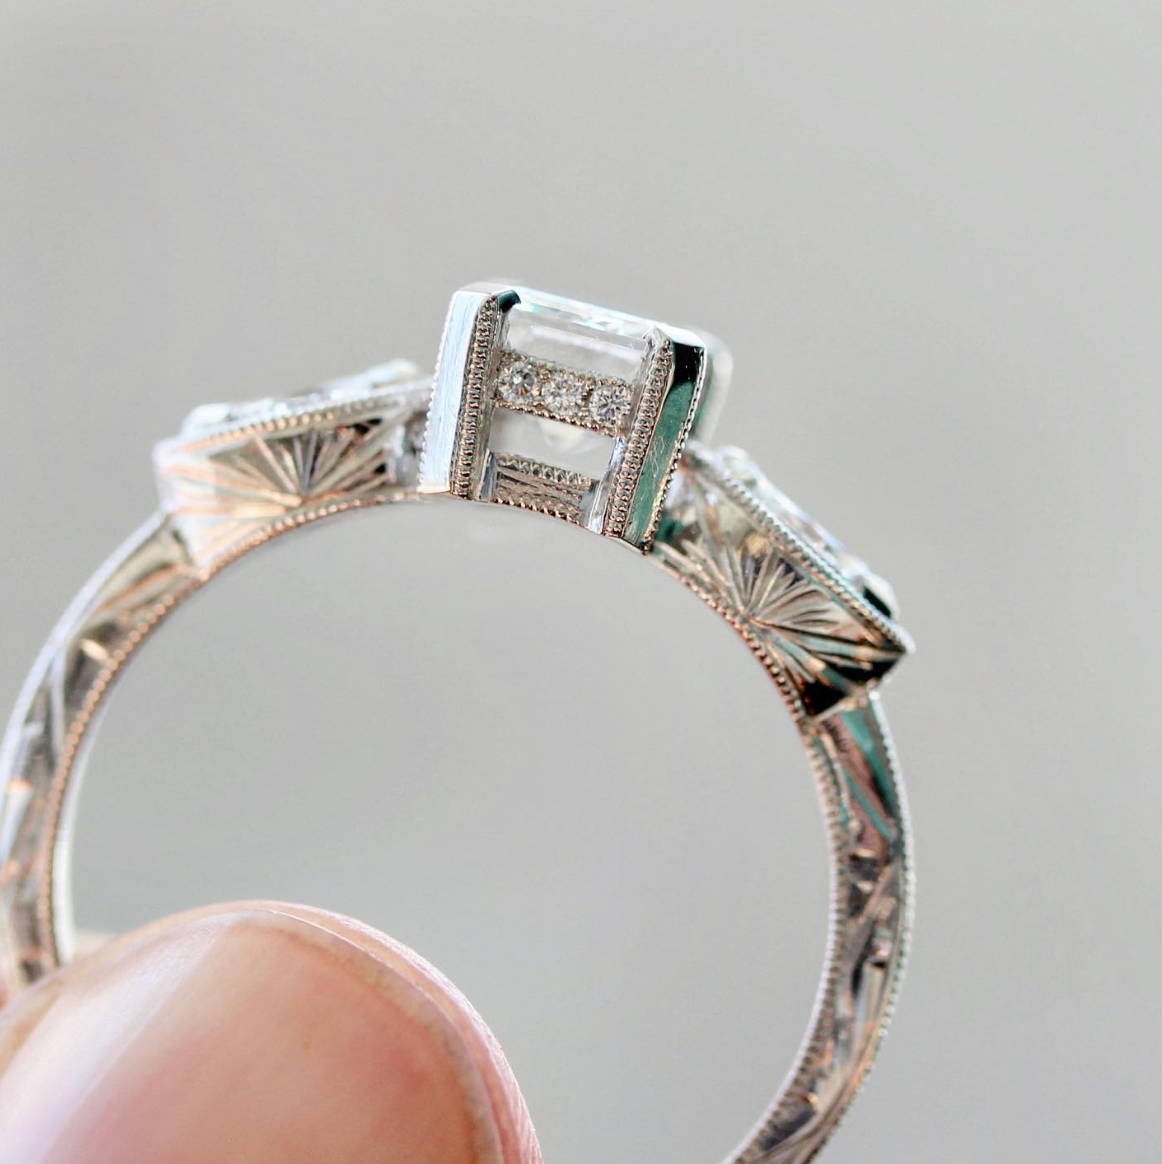 White gold diamond ring with engraving on side